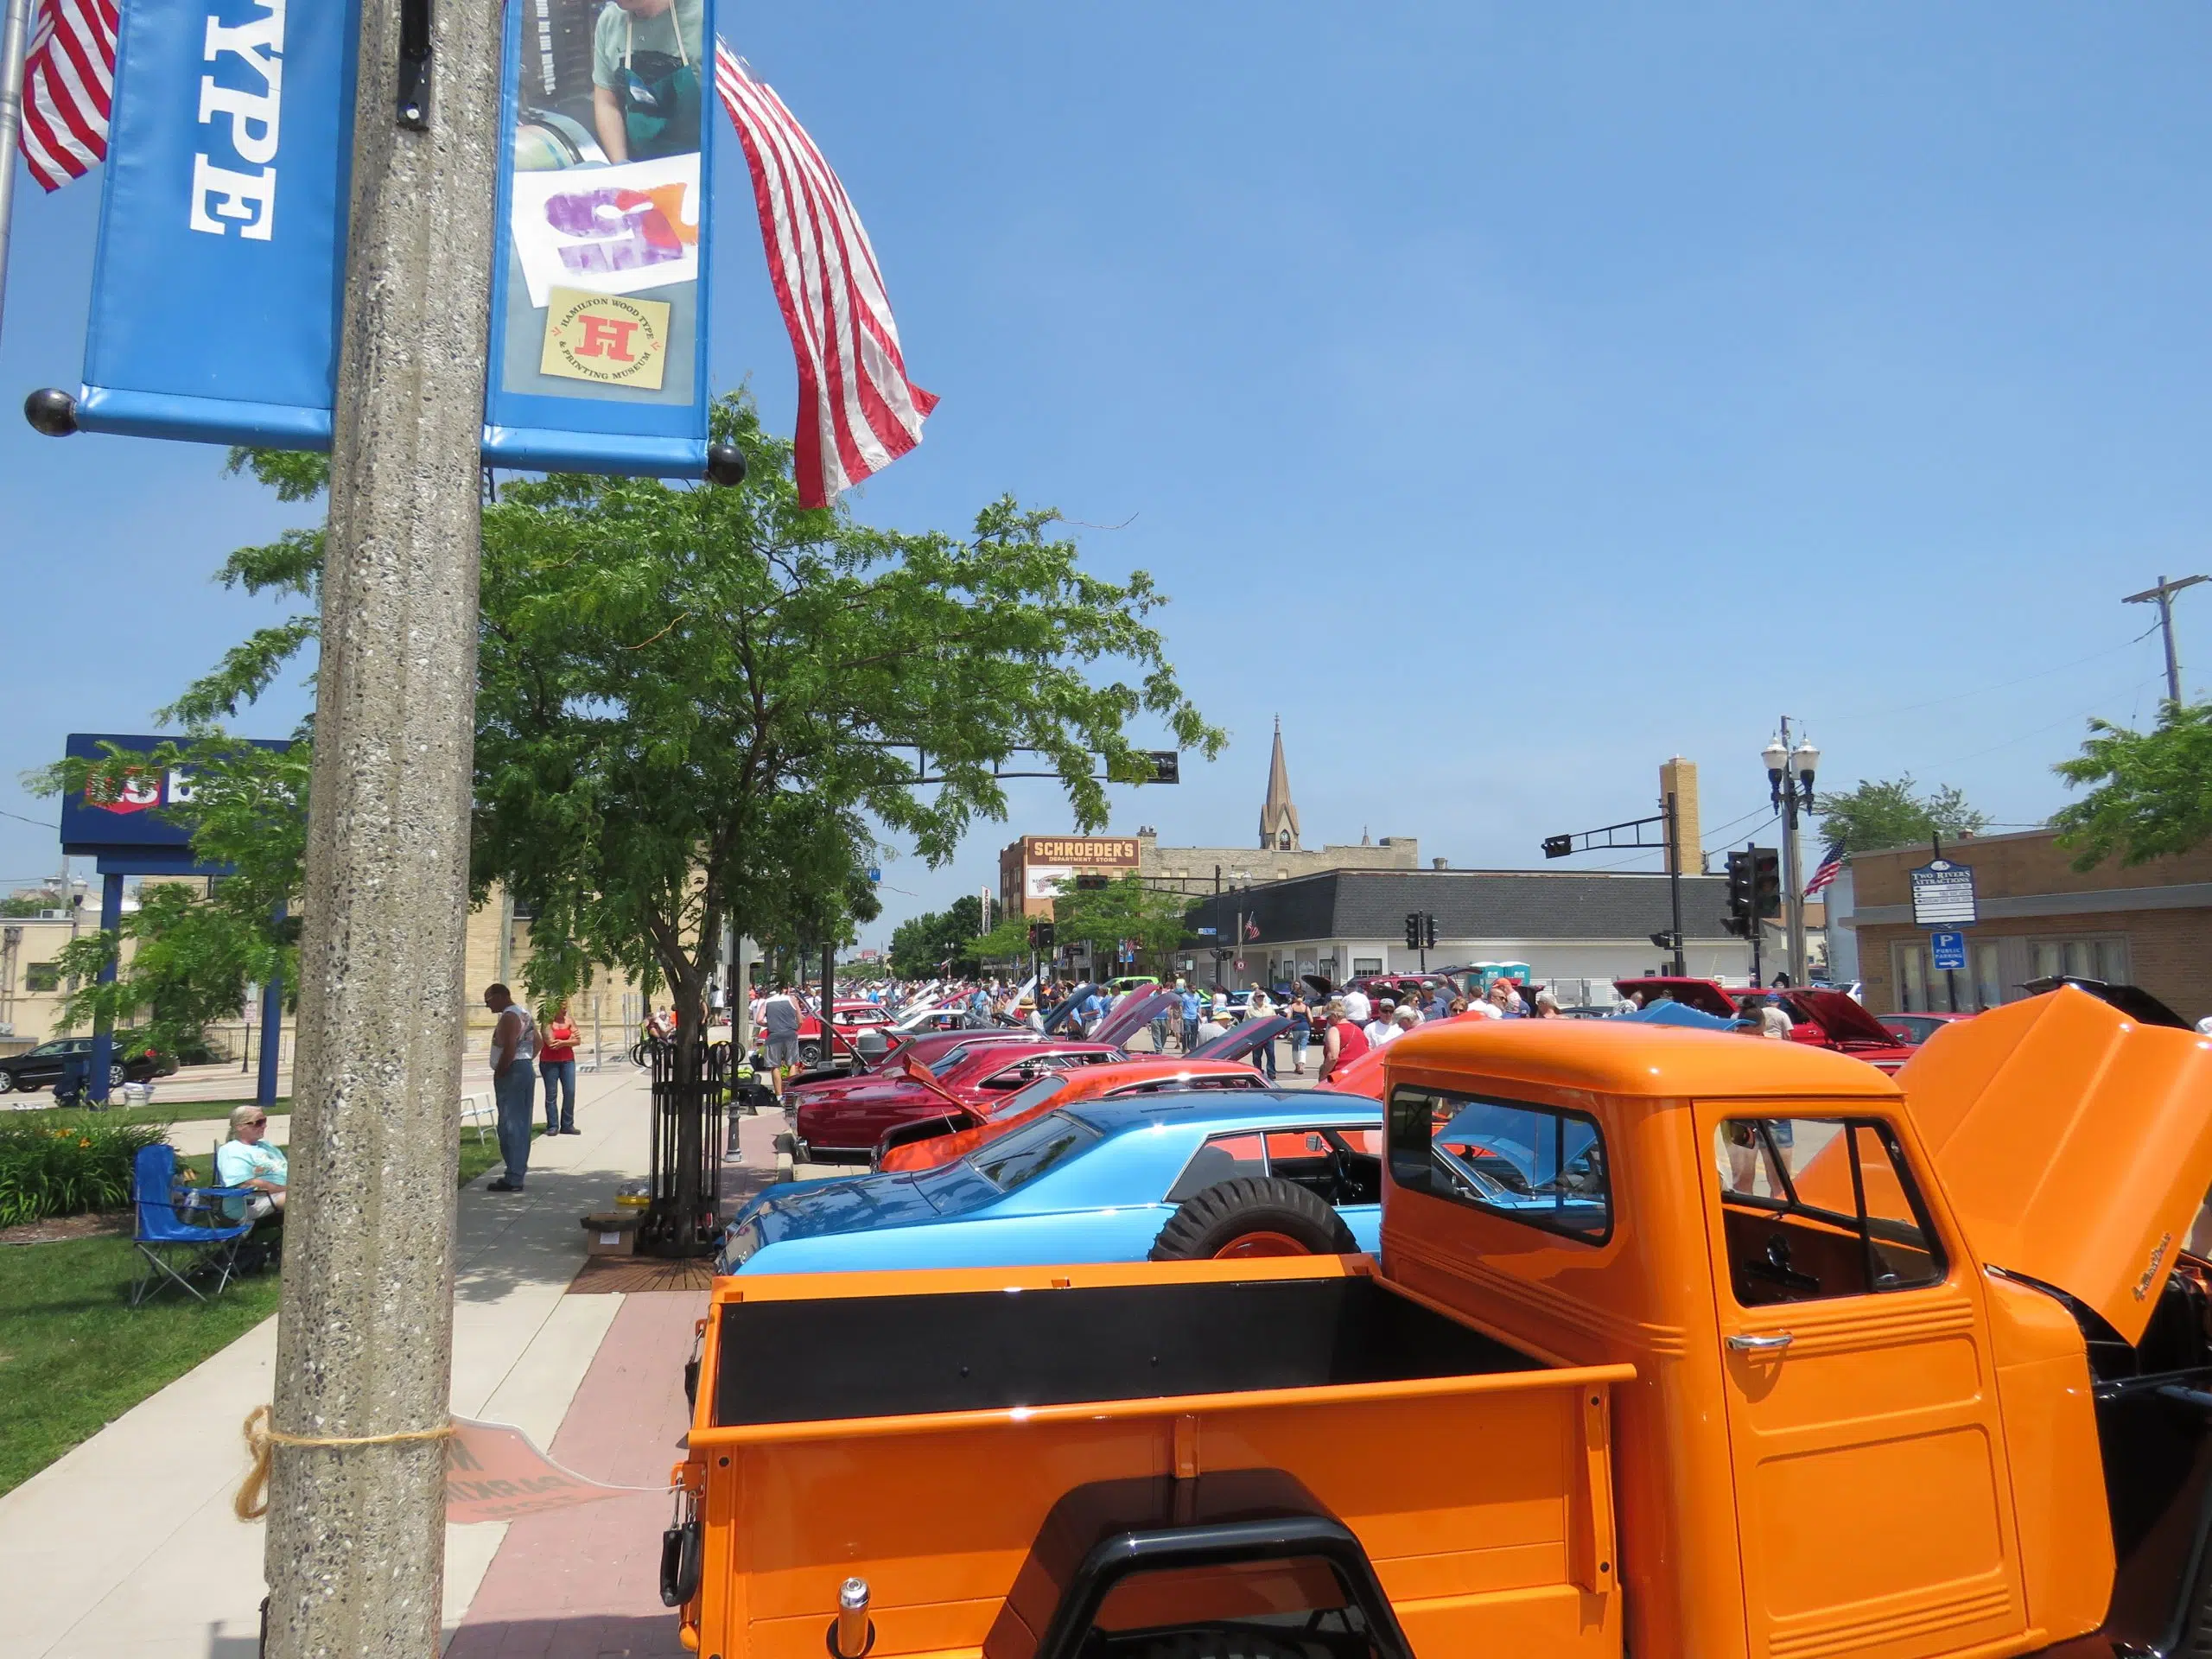 Cool City Classic Car Show and Cruise Returns to the Lakeshore This Week